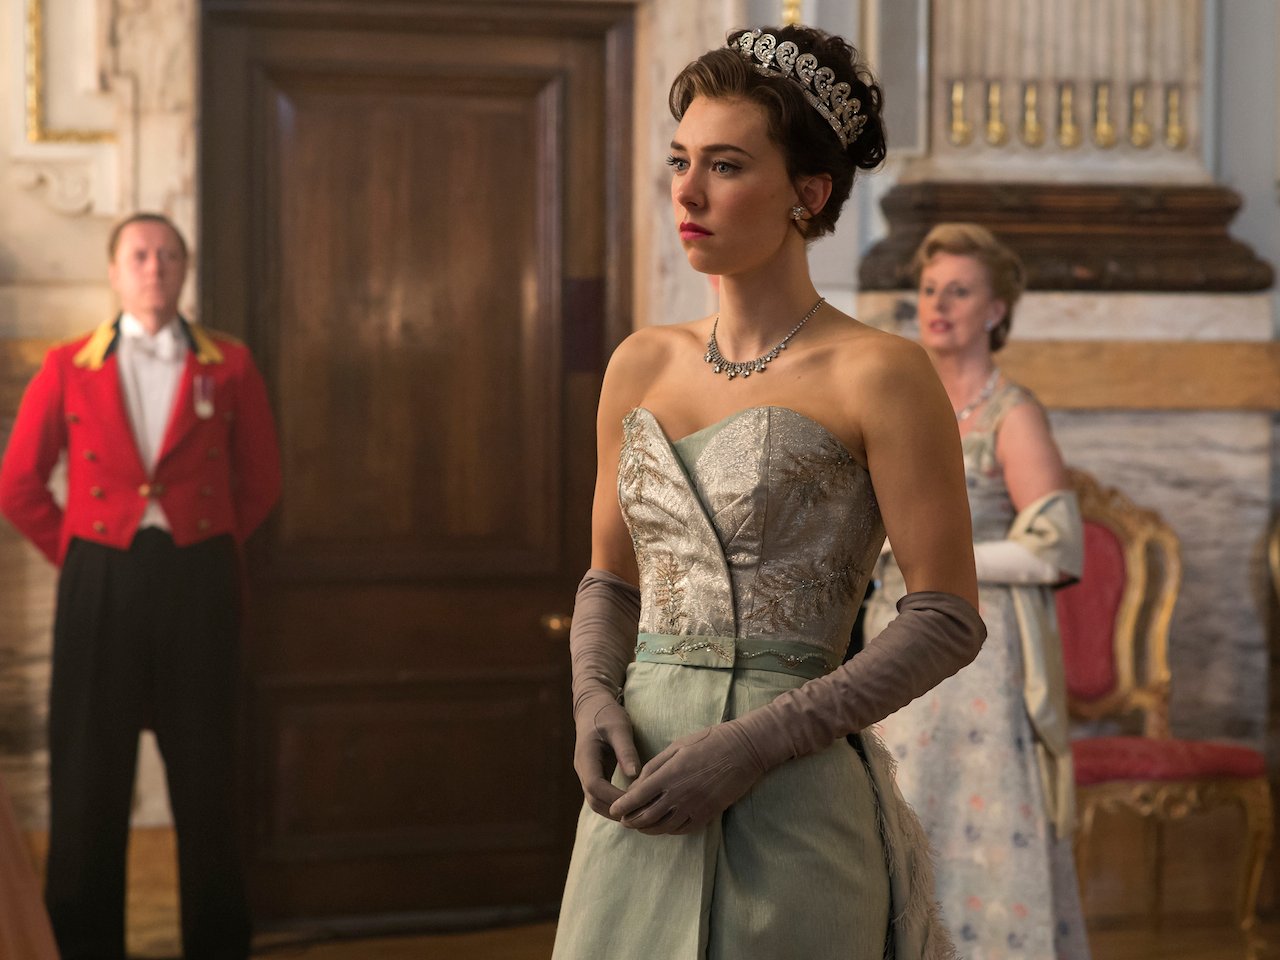  The Crown season 2 royals - Still shows Margaret, upset, as she arrives at the celebration in Queen Elizabeth II and Prince Philip's honour. 